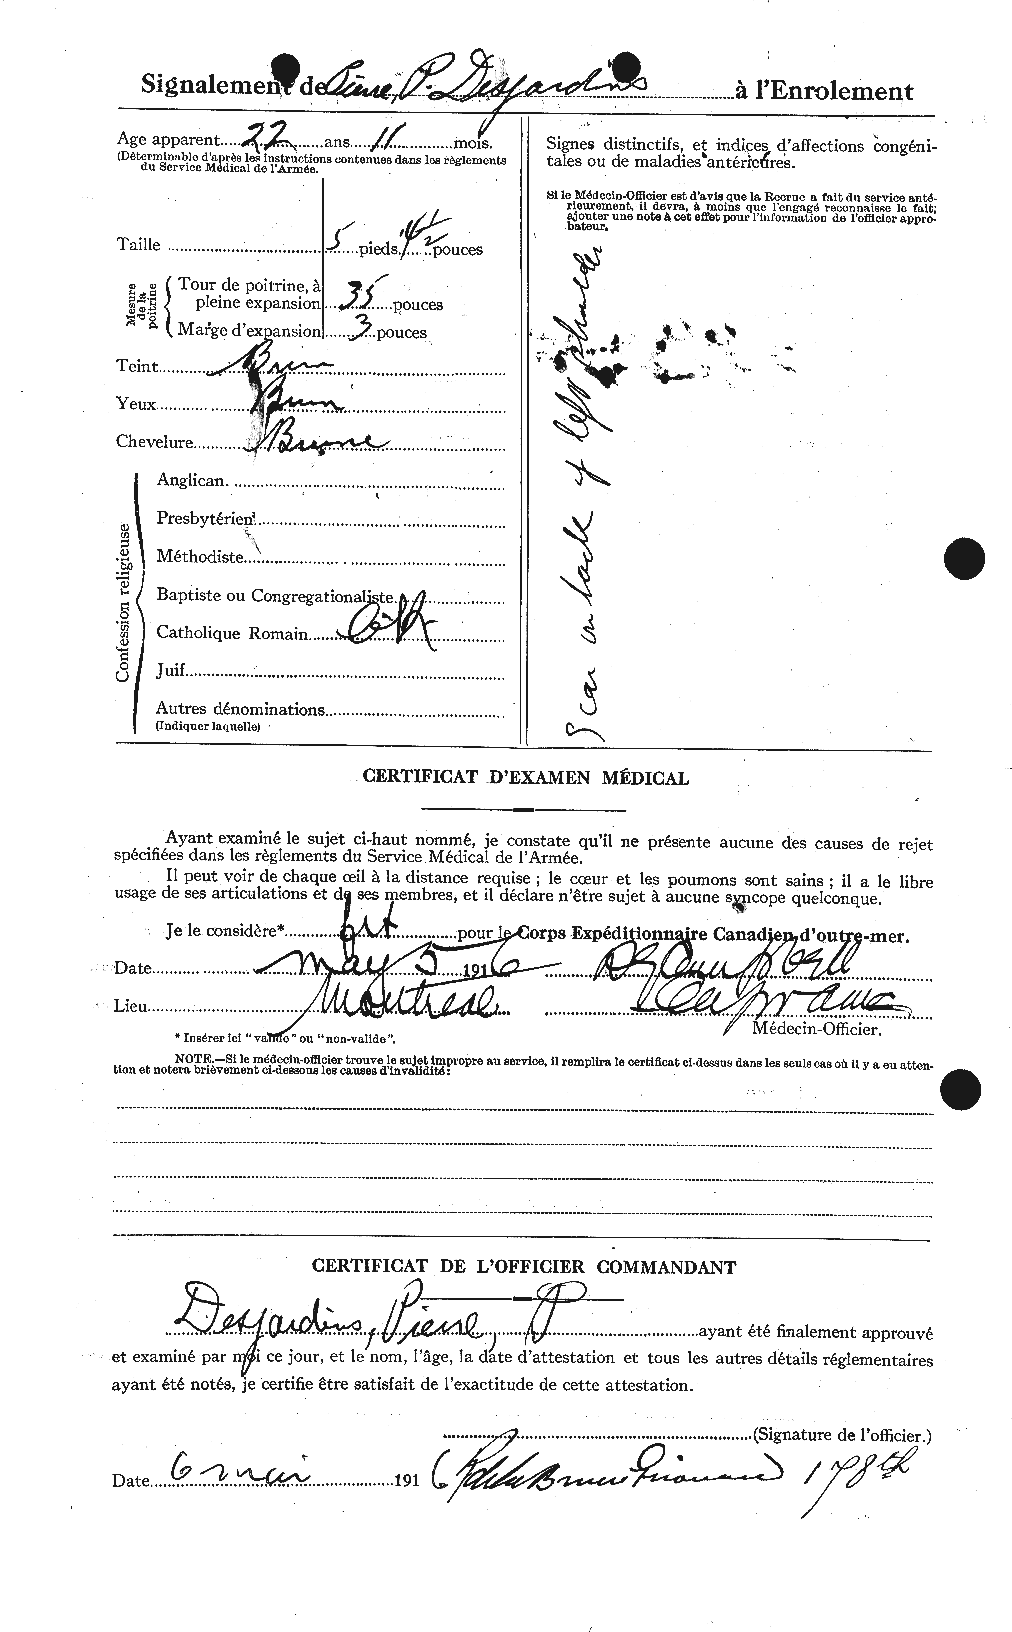 Personnel Records of the First World War - CEF 290001b